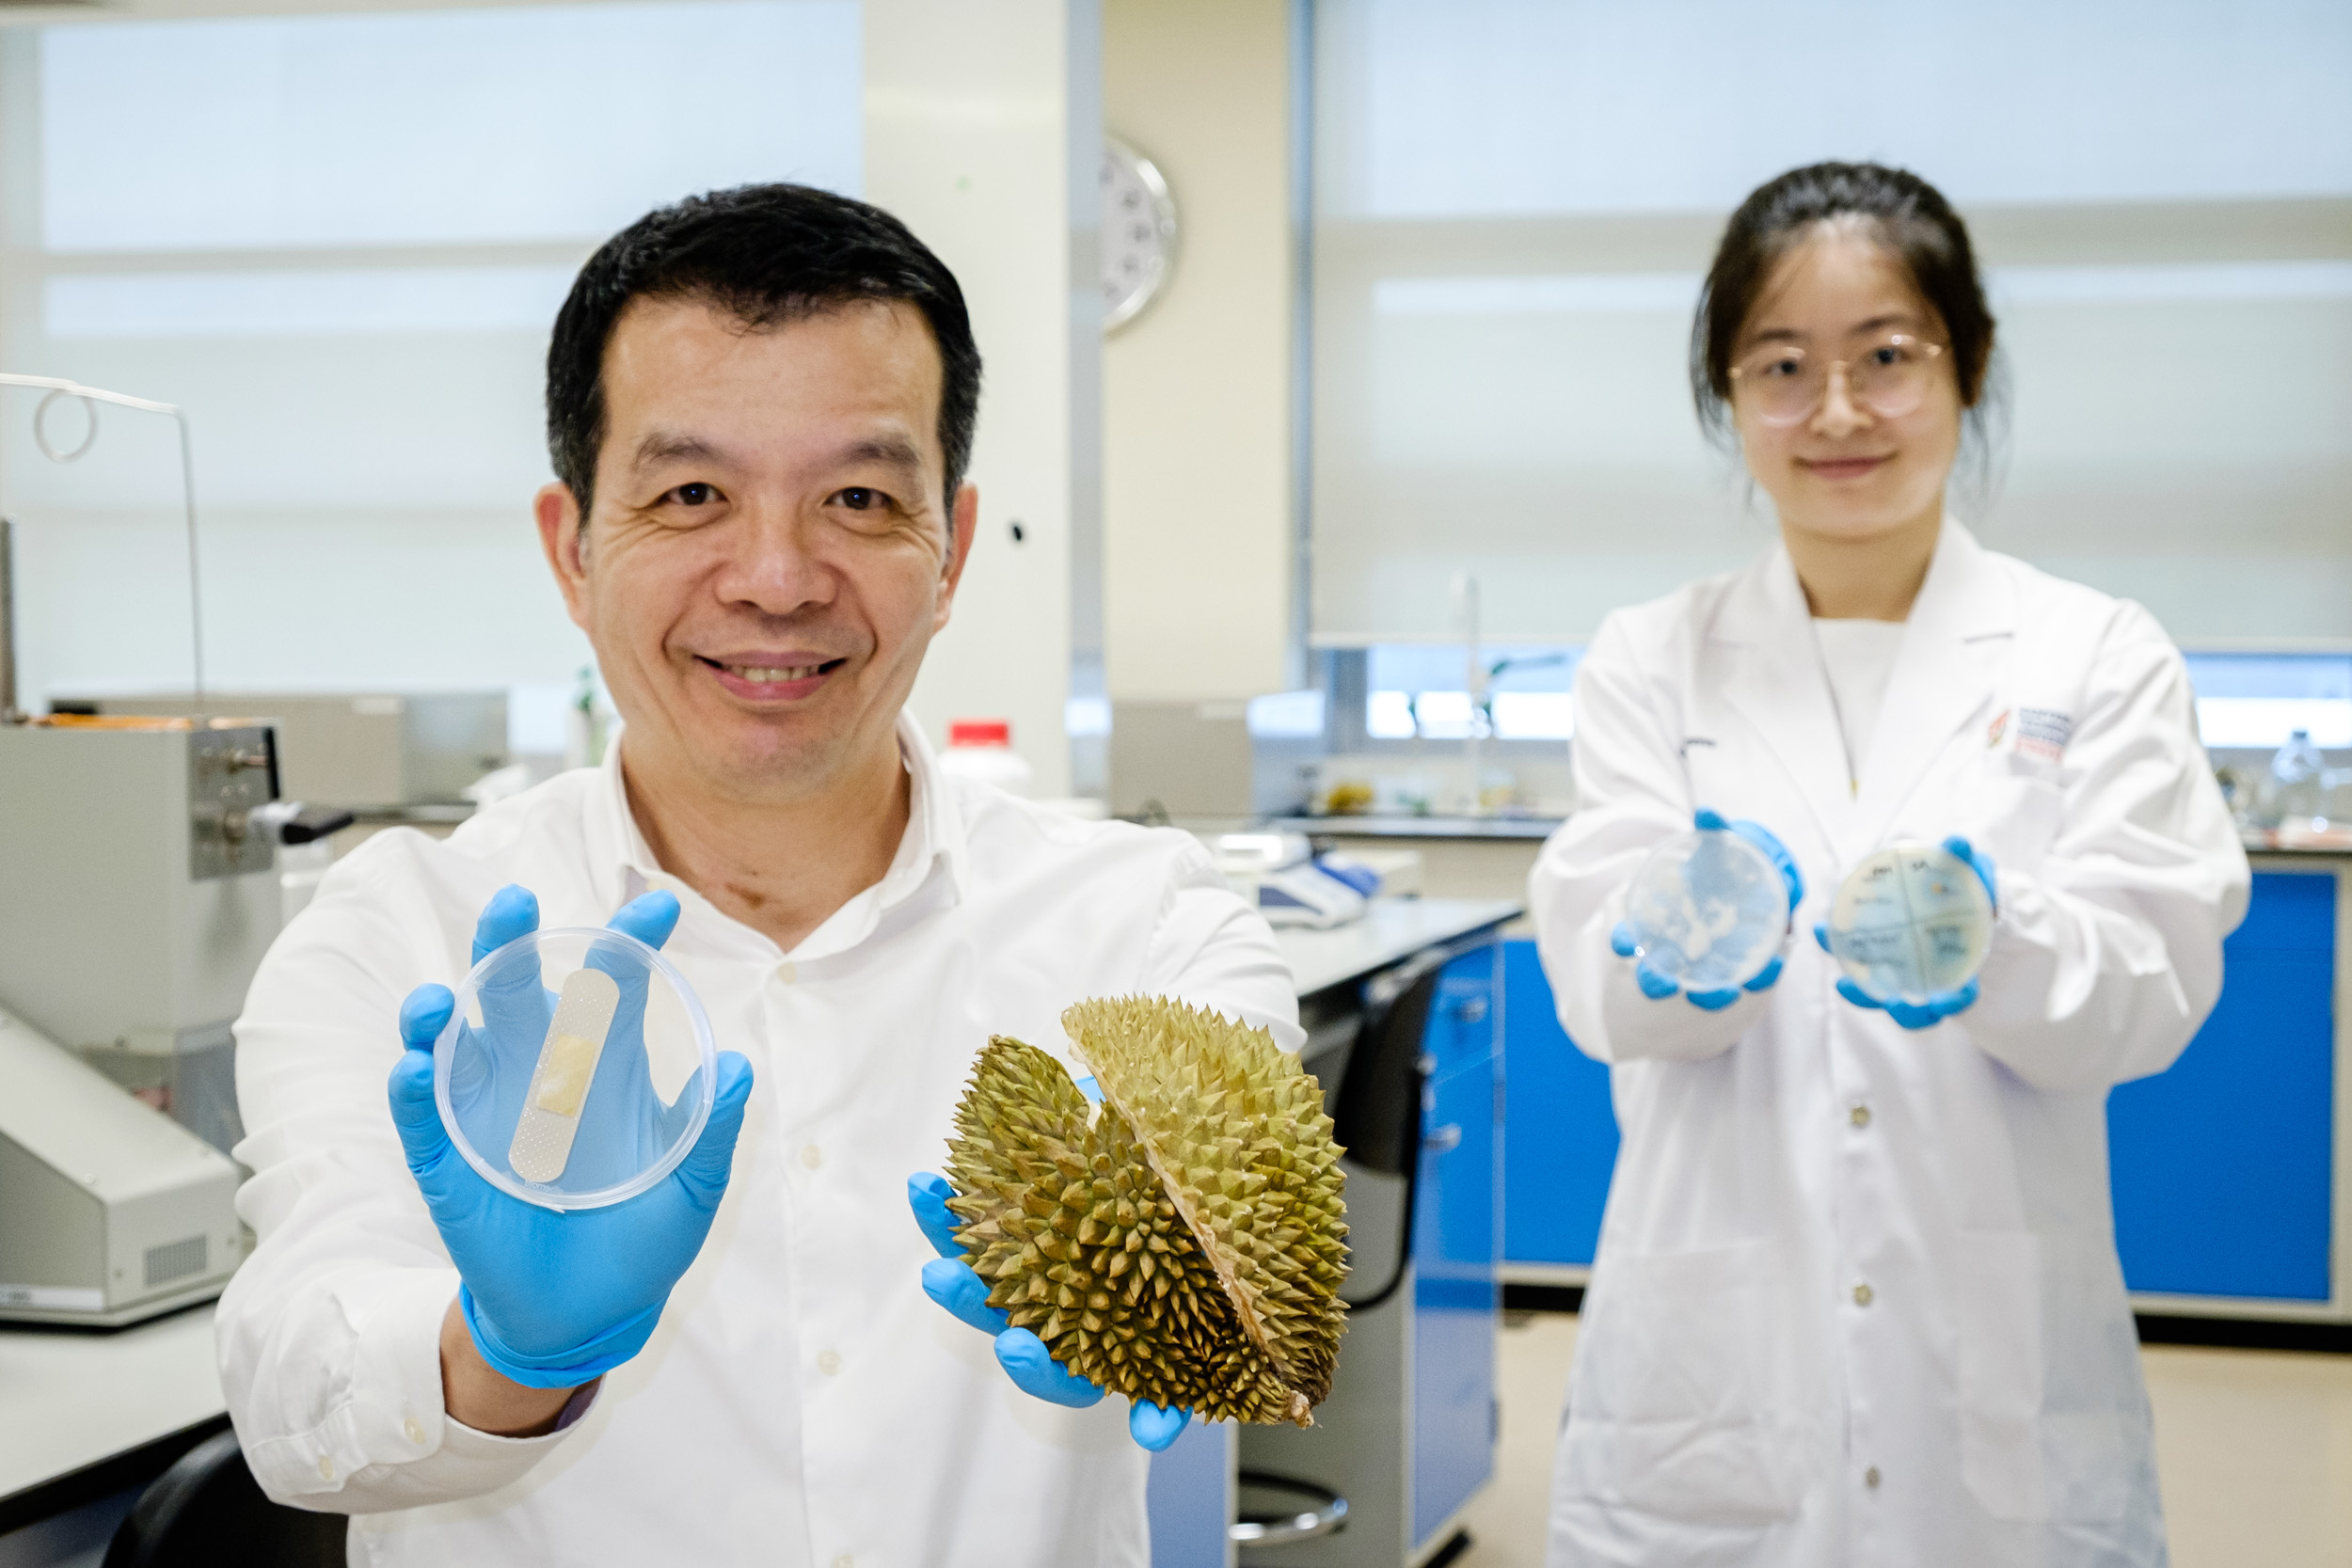 Prof William Chen (left) holding up a hydrogel bandage made from durian with PhD student Cui Xi